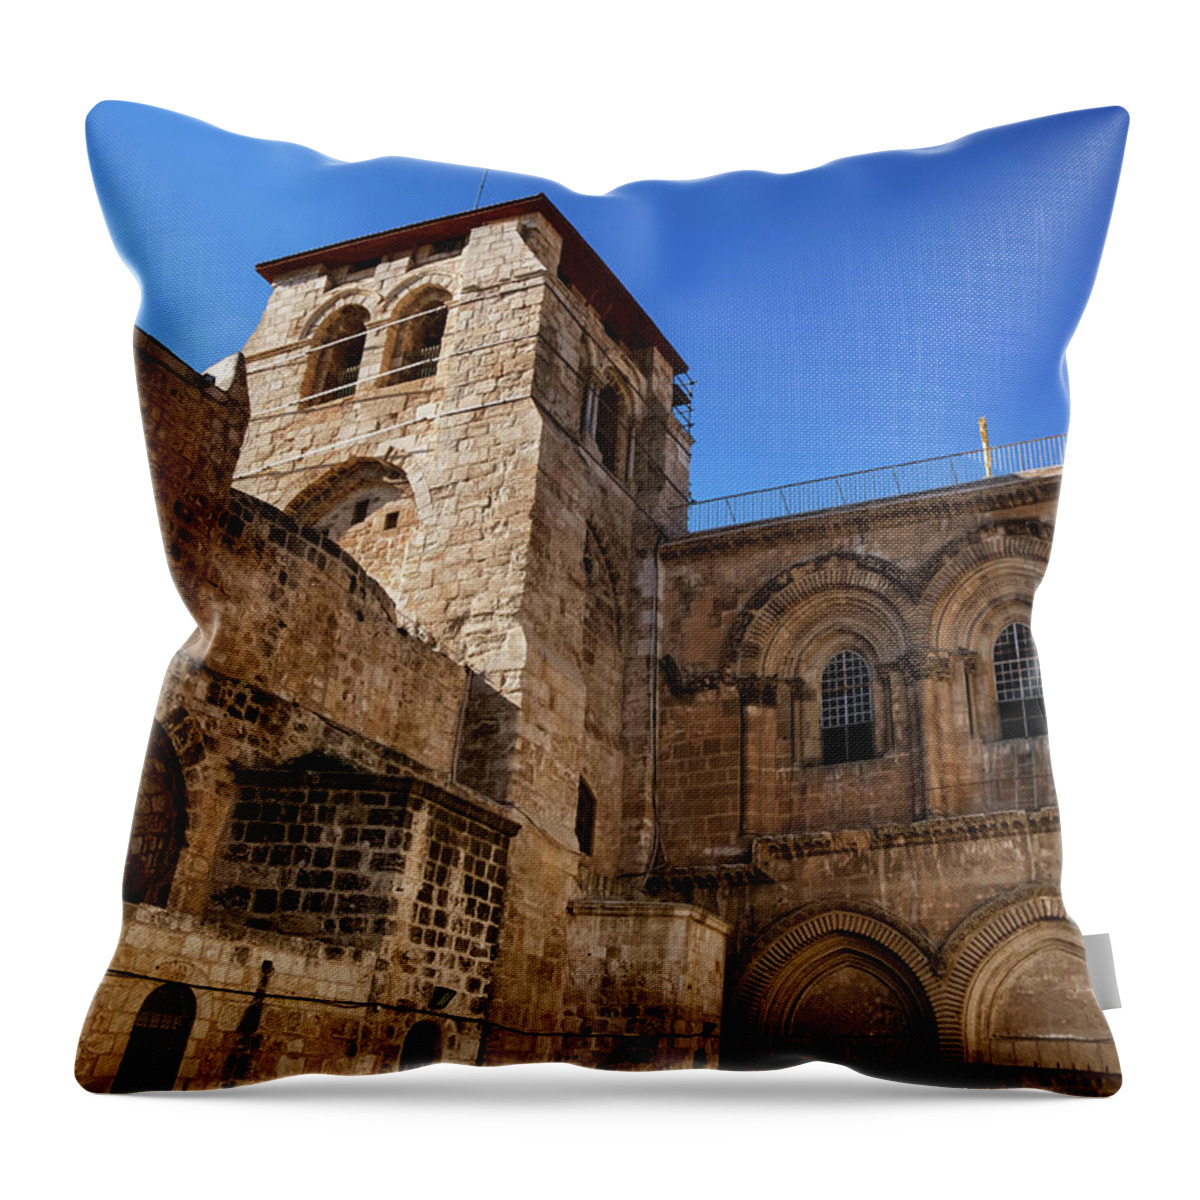 Israel Throw Pillow featuring the photograph Church of the Holy Sepulchre, Jerusalem, Isreal by Elenarts - Elena Duvernay photo